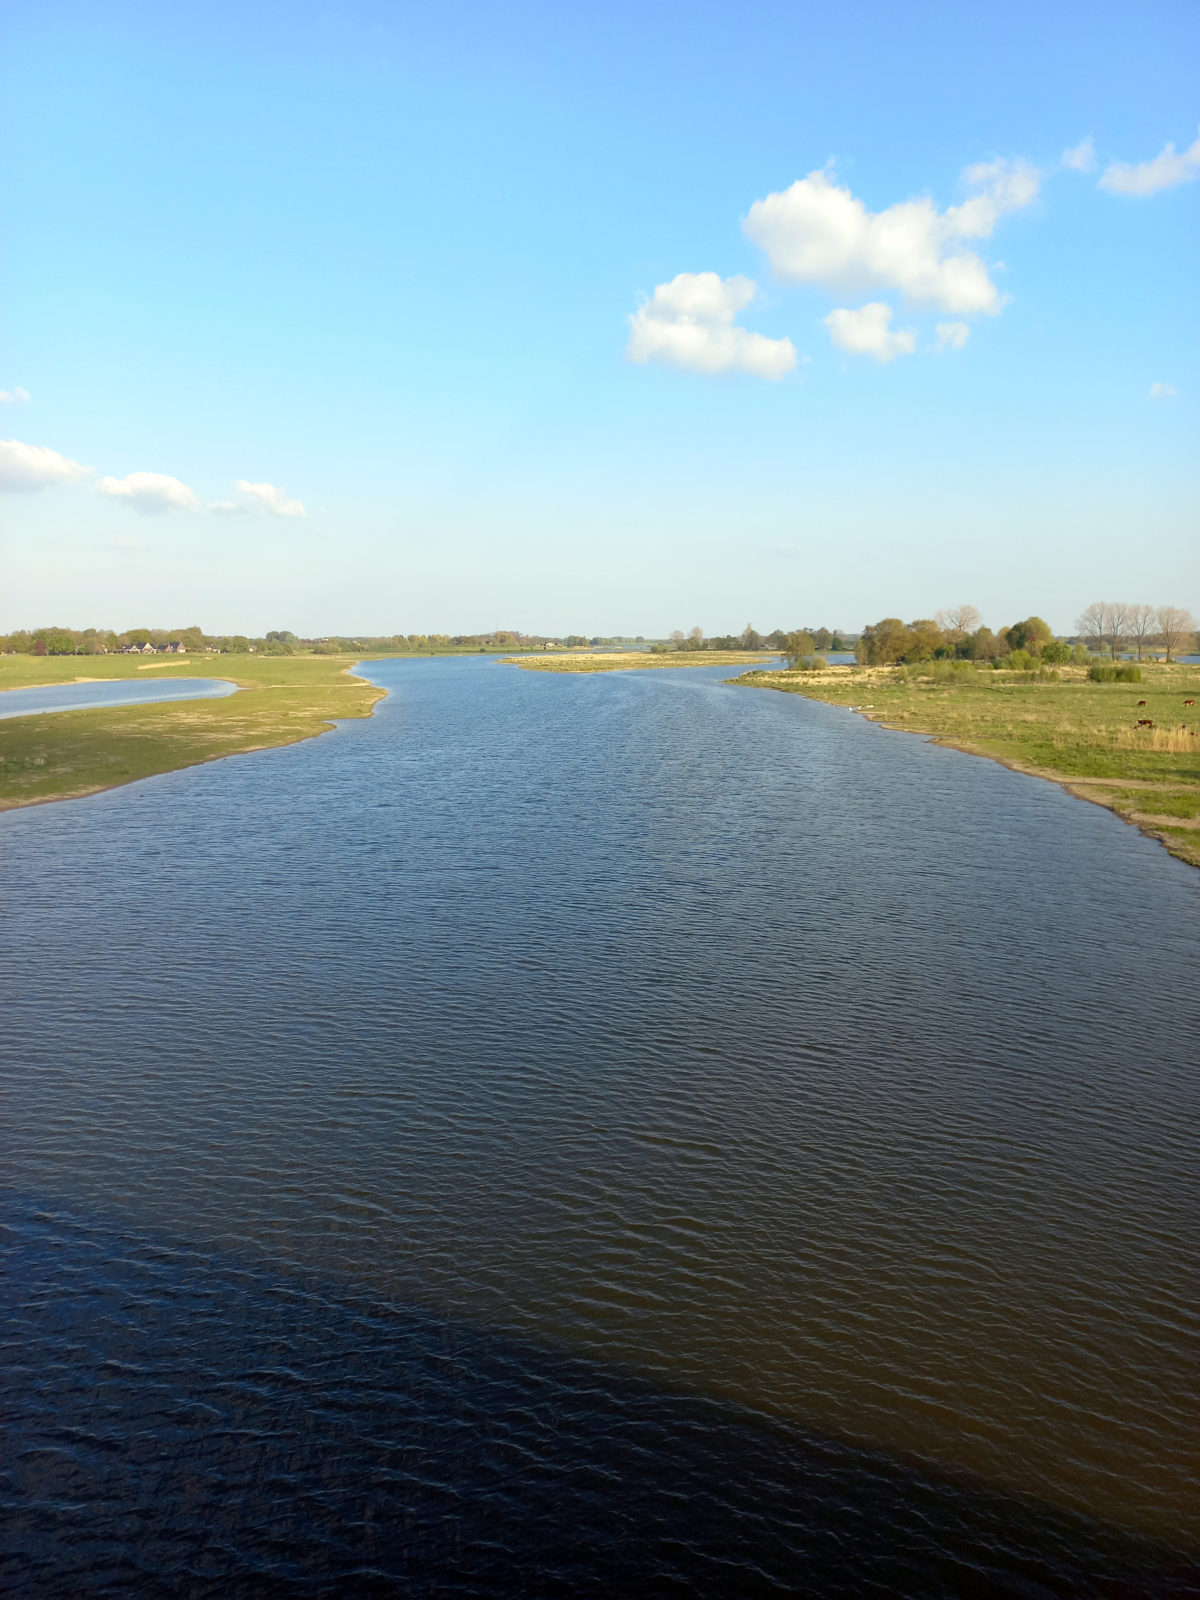 Dutch water companies call for cooperation with new cabinet